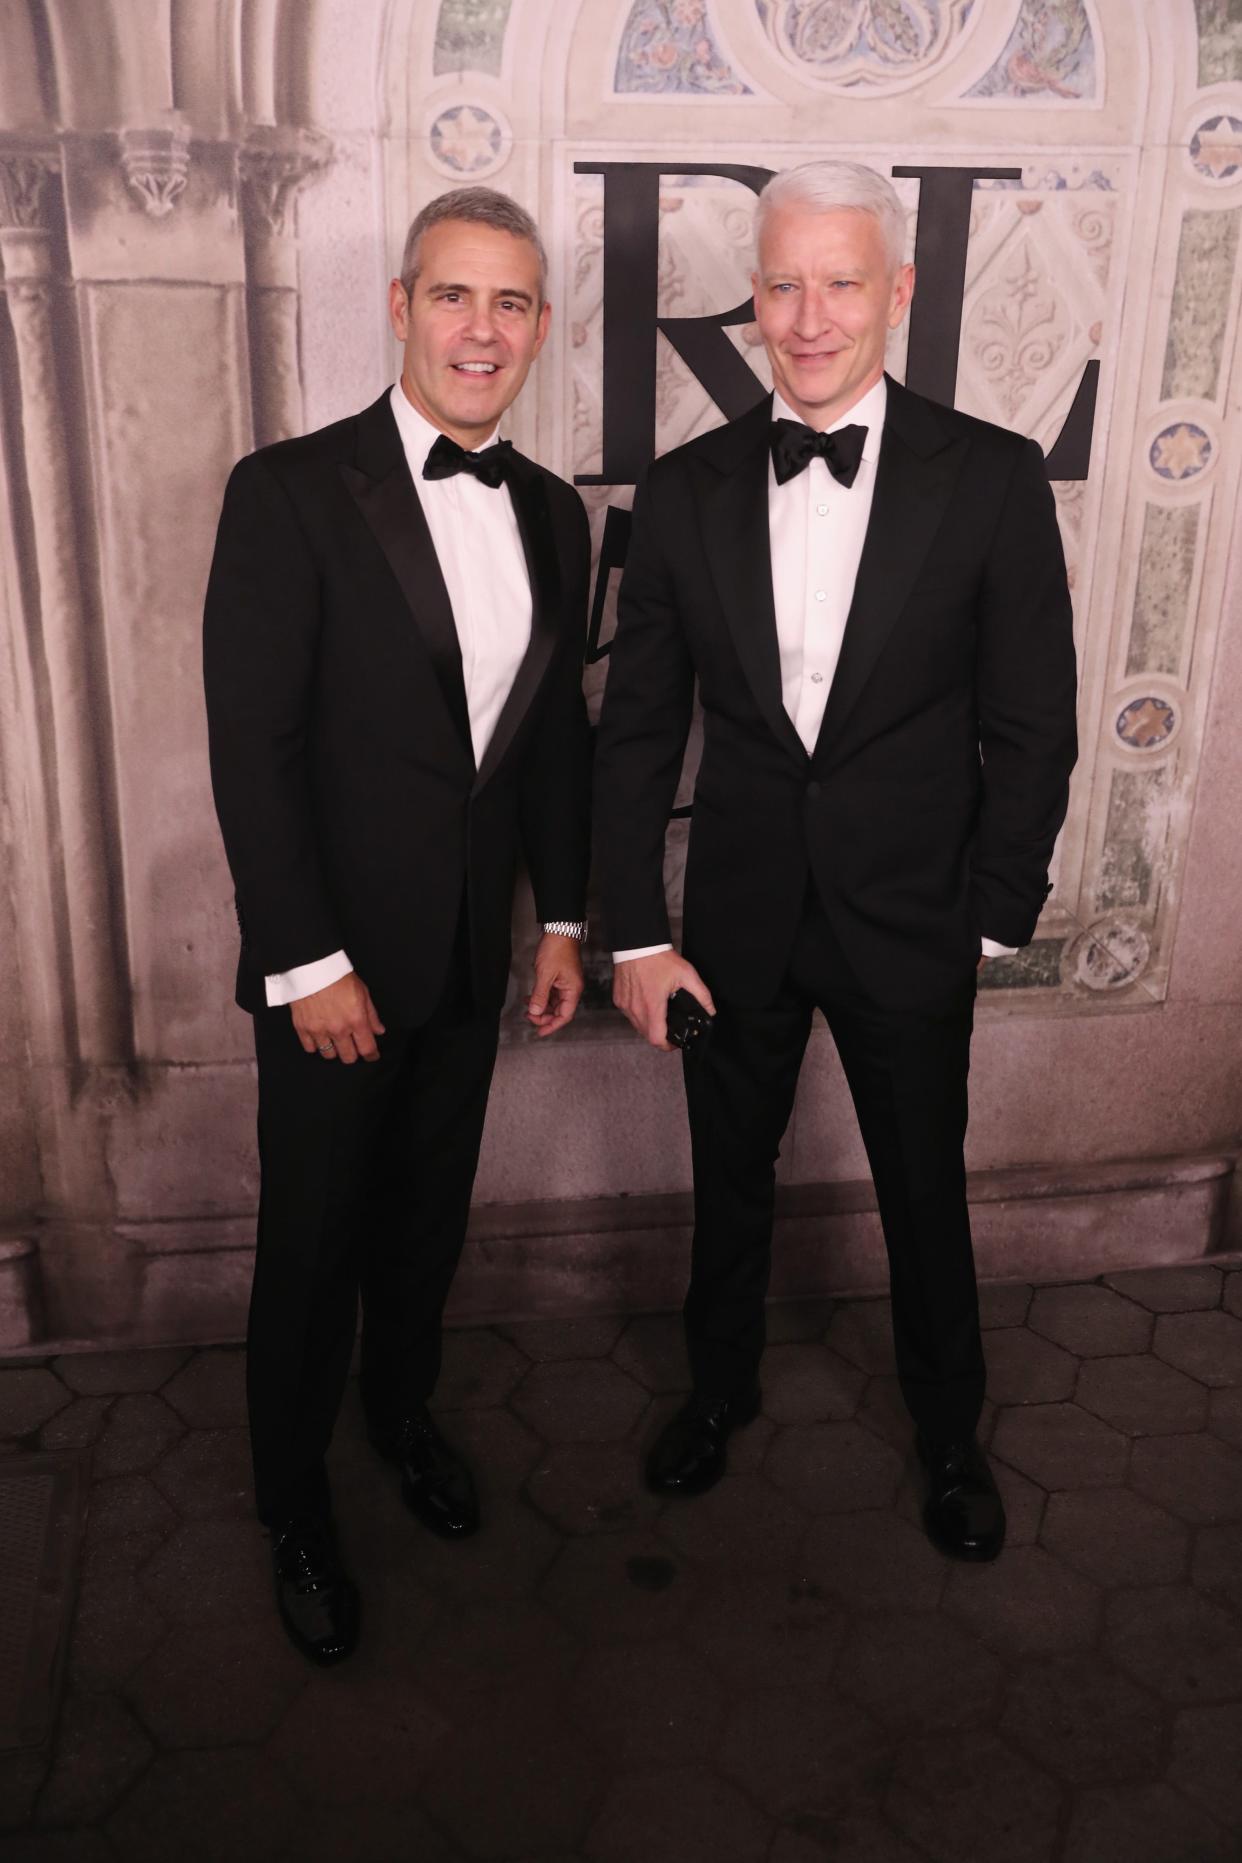 Andy Cohen, left, and Anderson Cooper, seen at a Ralph Lauren fashion show in 2018, shared an awkward, touching and risque moment as they honored Cooper's mother, Gloria Vanderbilt, who died in June, during CNN's New Year's Eve broadcast Tuesday.